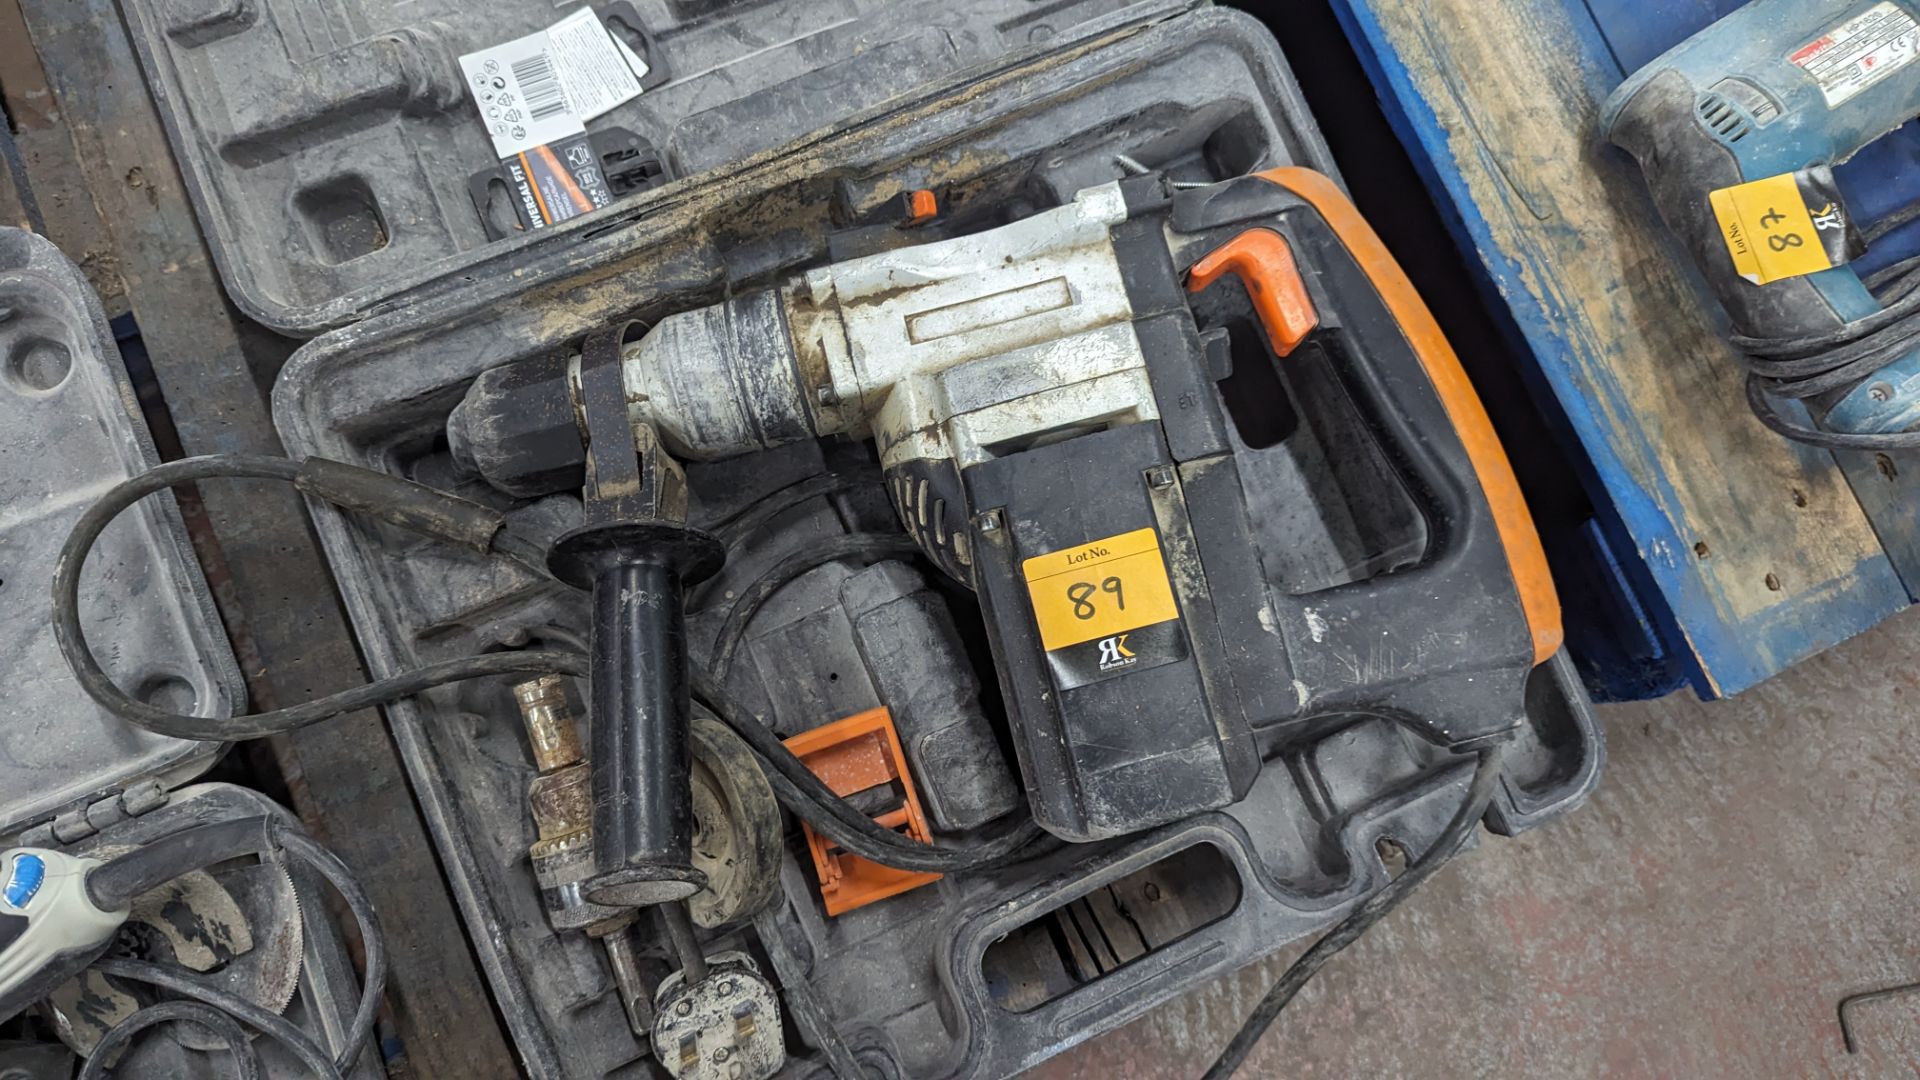 Challenge model EH32XD-1 heavy duty hammer drill in case - Image 6 of 6